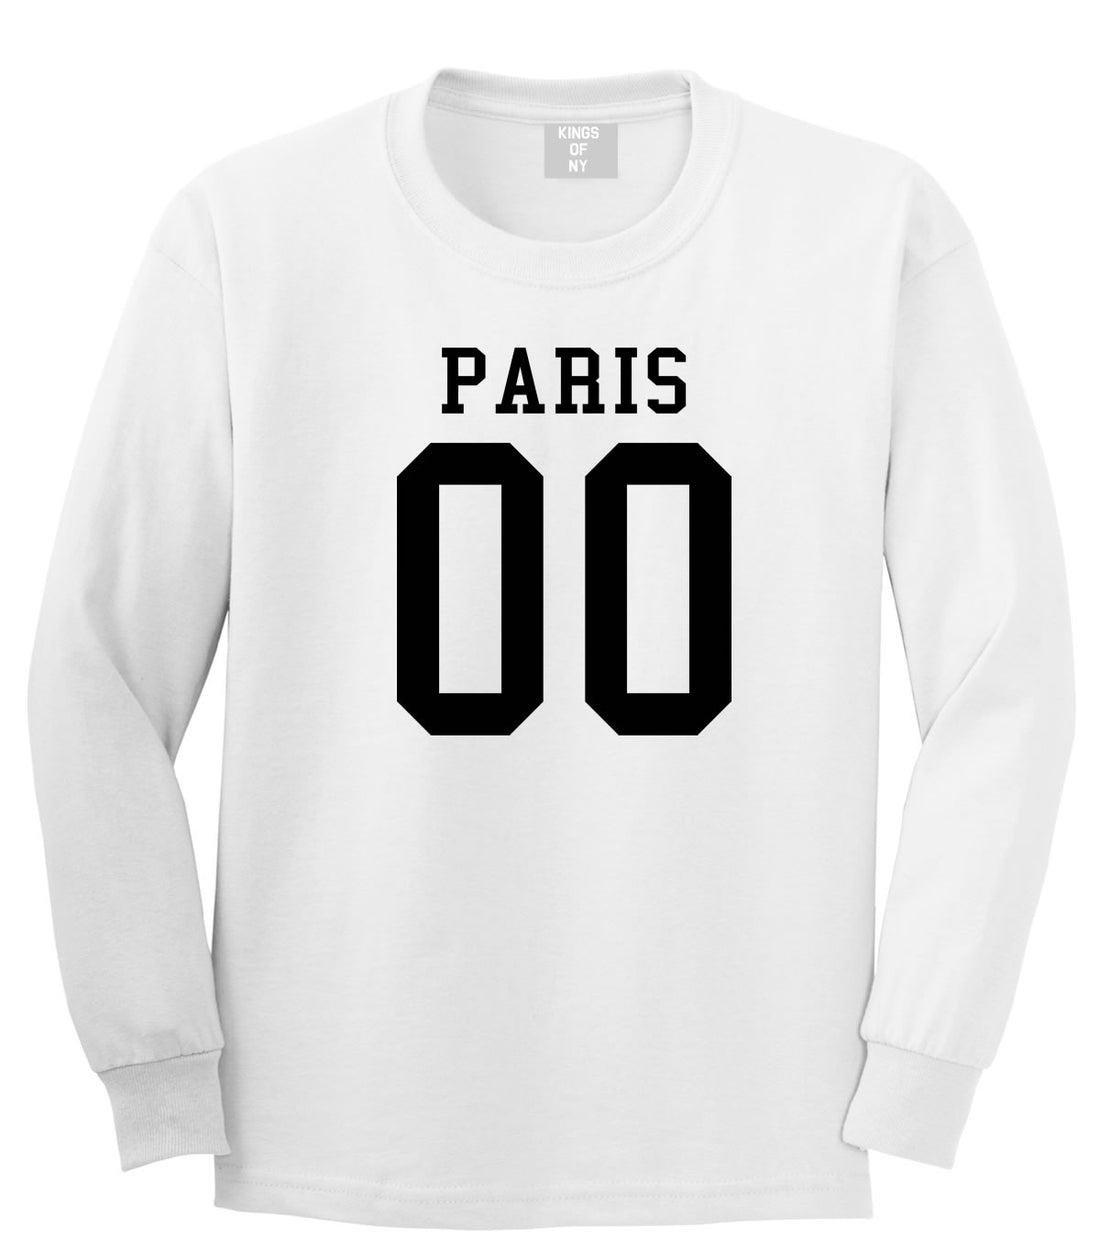 Paris Team 00 Jersey Long Sleeve T-Shirt in White By Kings Of NY